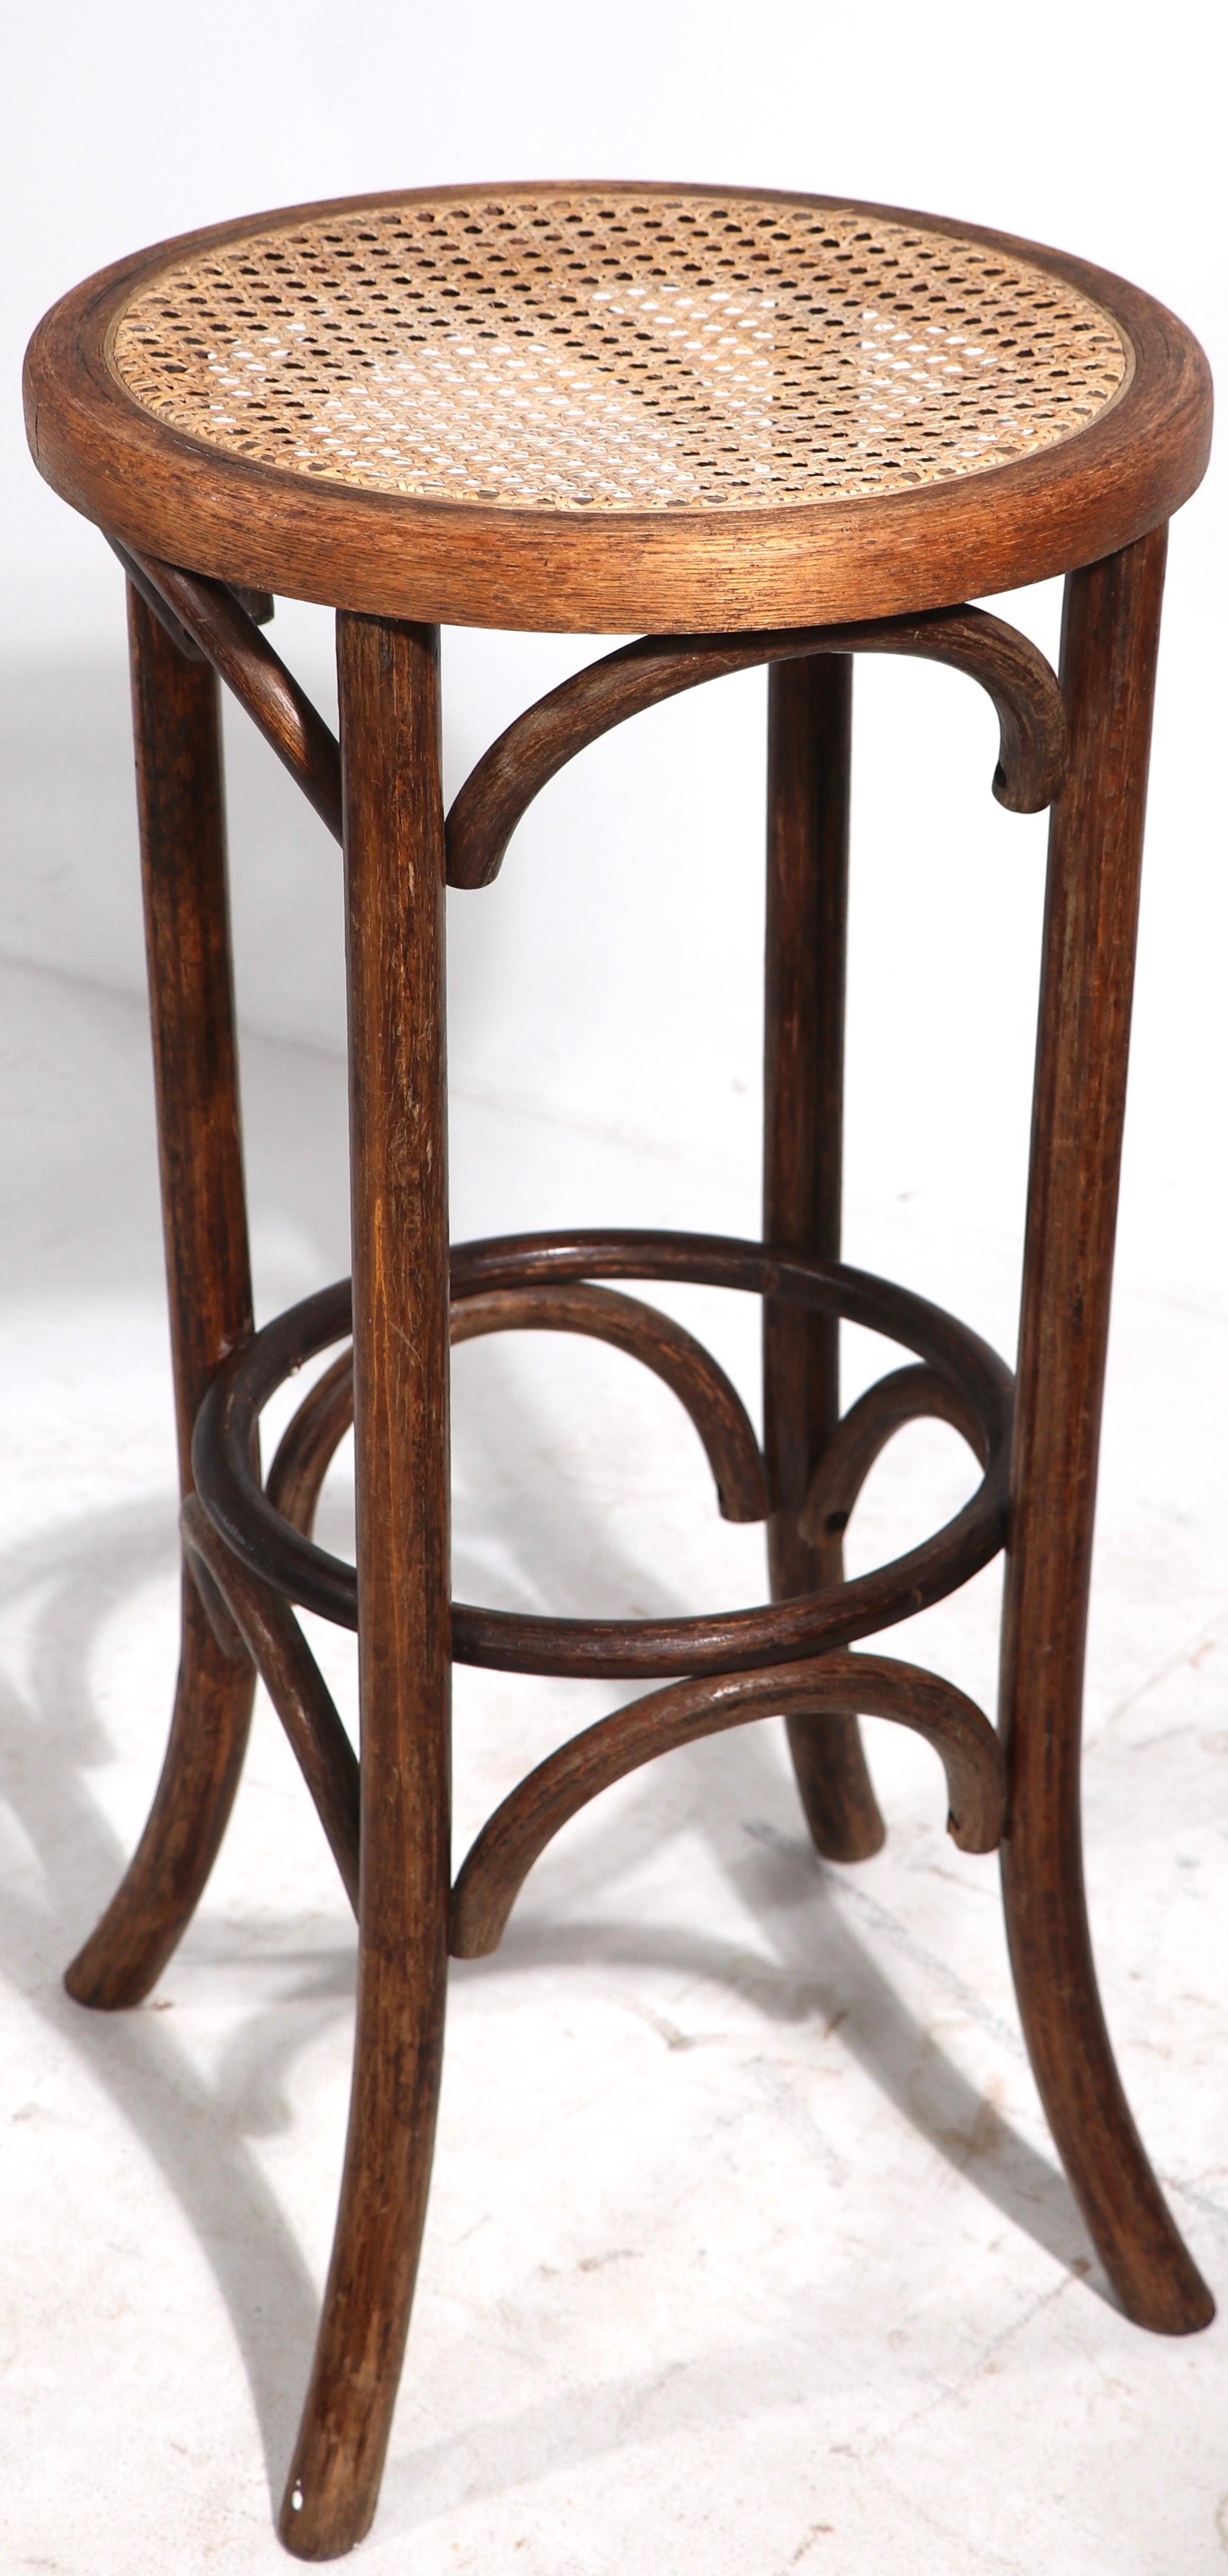 Vienna Secessionist school steam bentwood bar stool with cane seat. This antique example is in very good condition, solid, sturdy, clean and ready to use. Attributed to Thonet, unsigned.